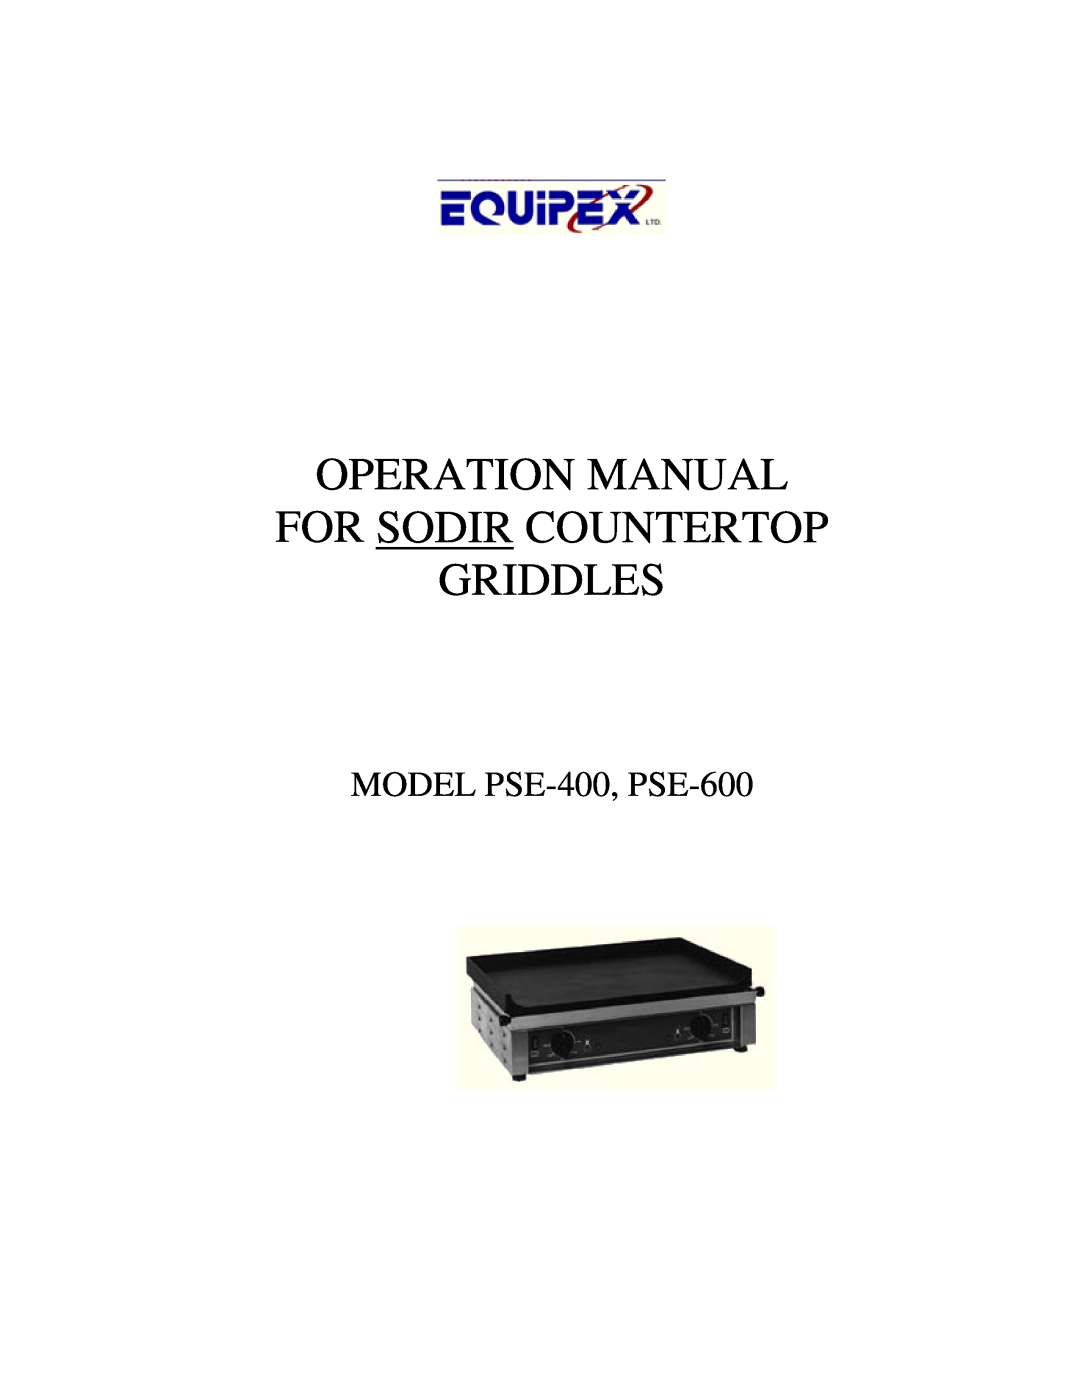 Equipex operation manual MODEL PSE-400, PSE-600 